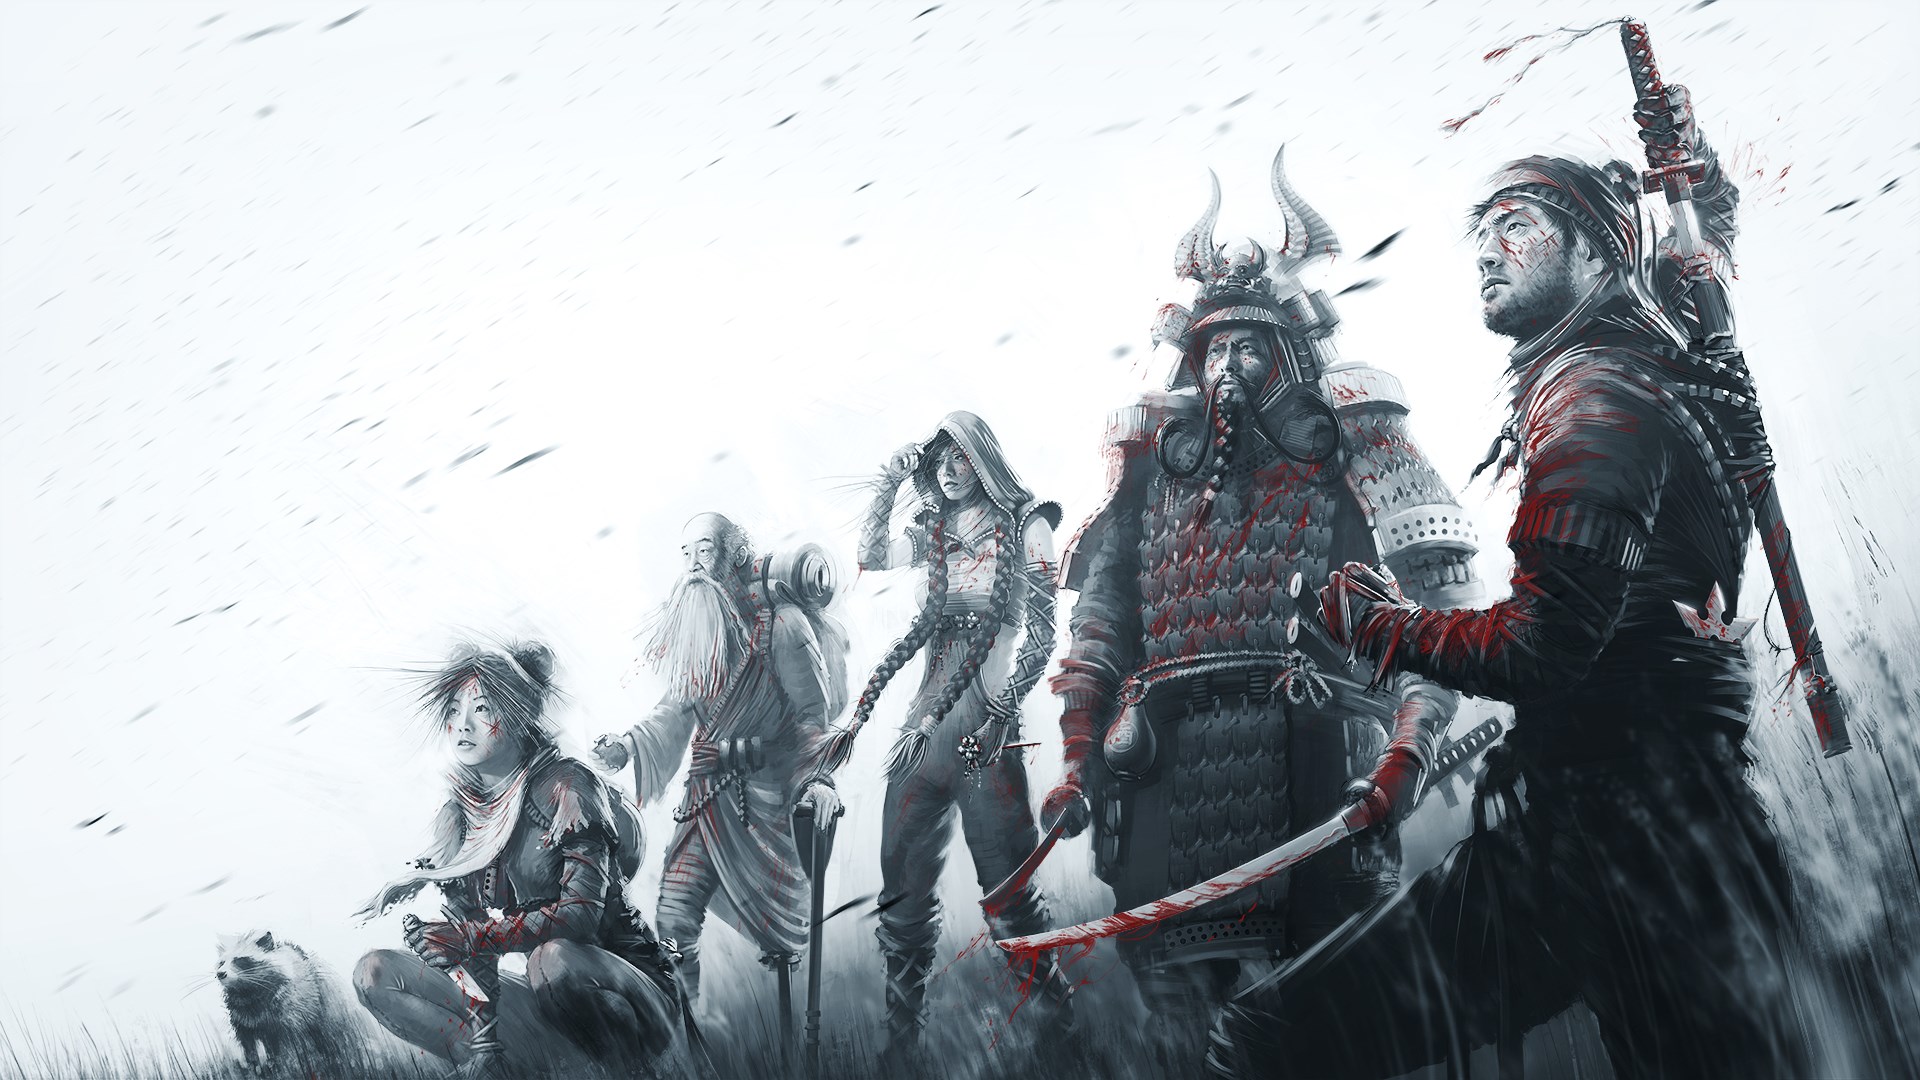 12 Days of Free Games: Day 10 – Shadow Tactics Blades of the Shogun